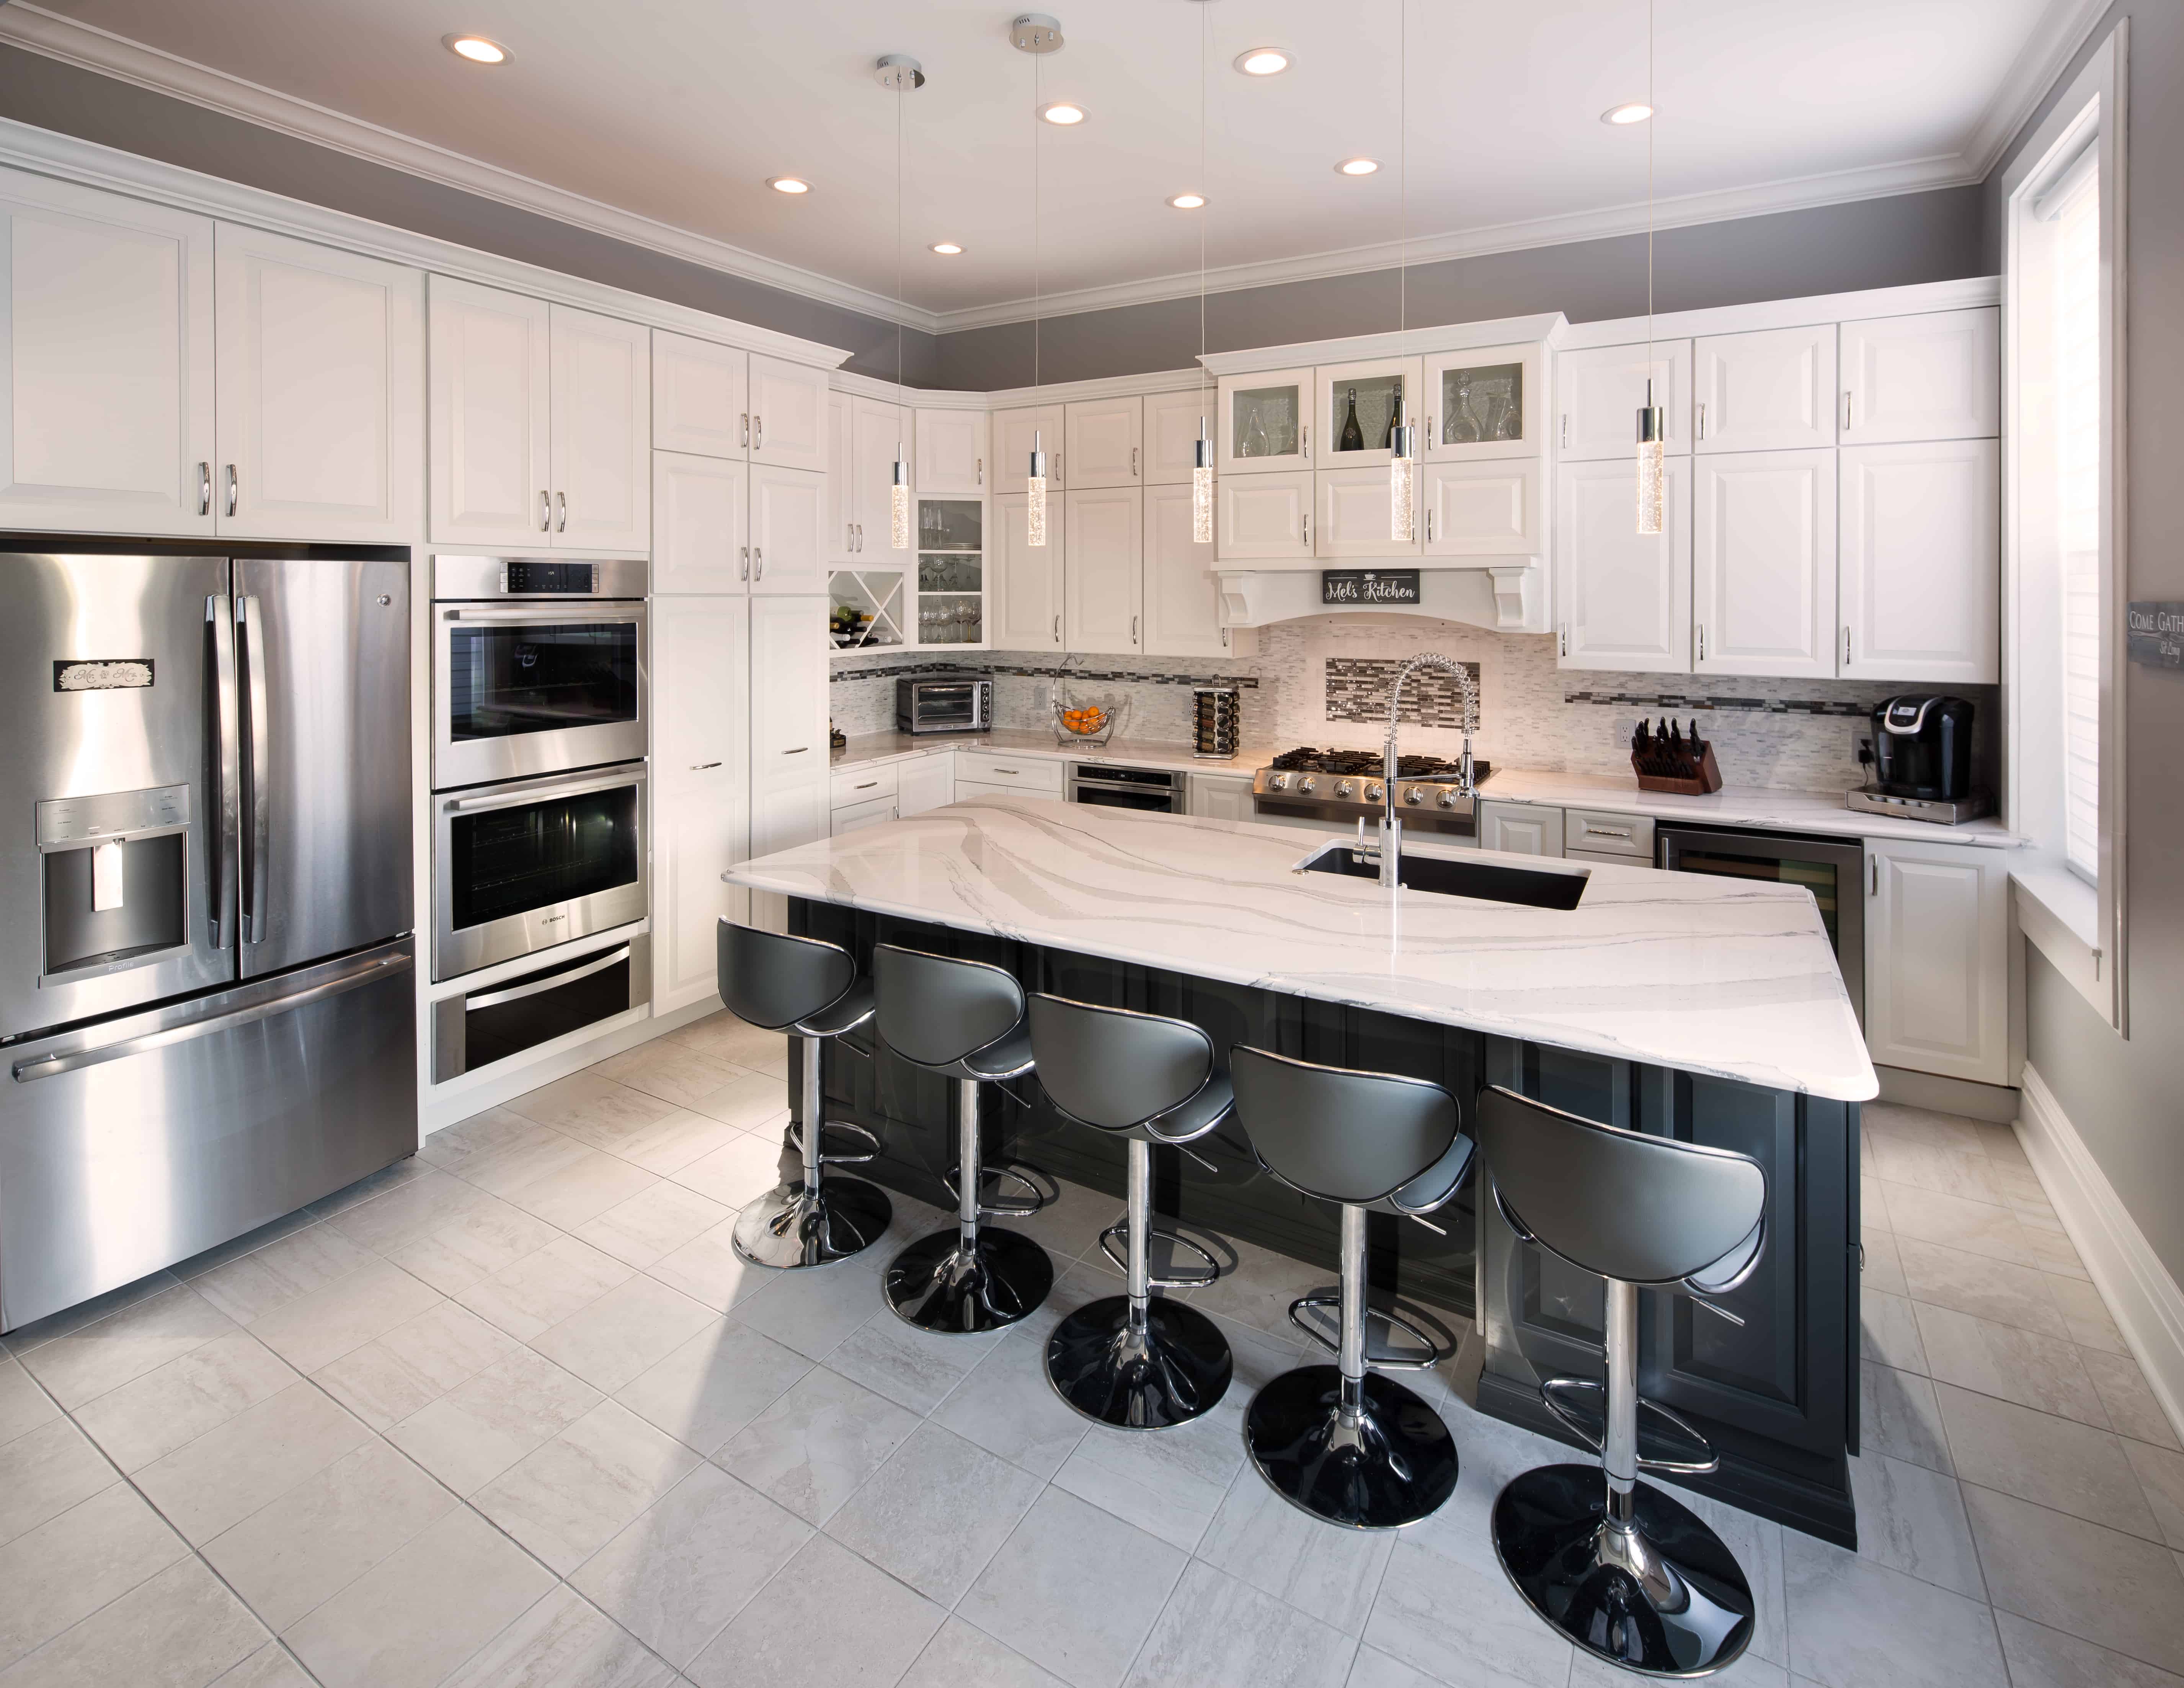 Are You Dreaming of a Gourmet Kitchen?